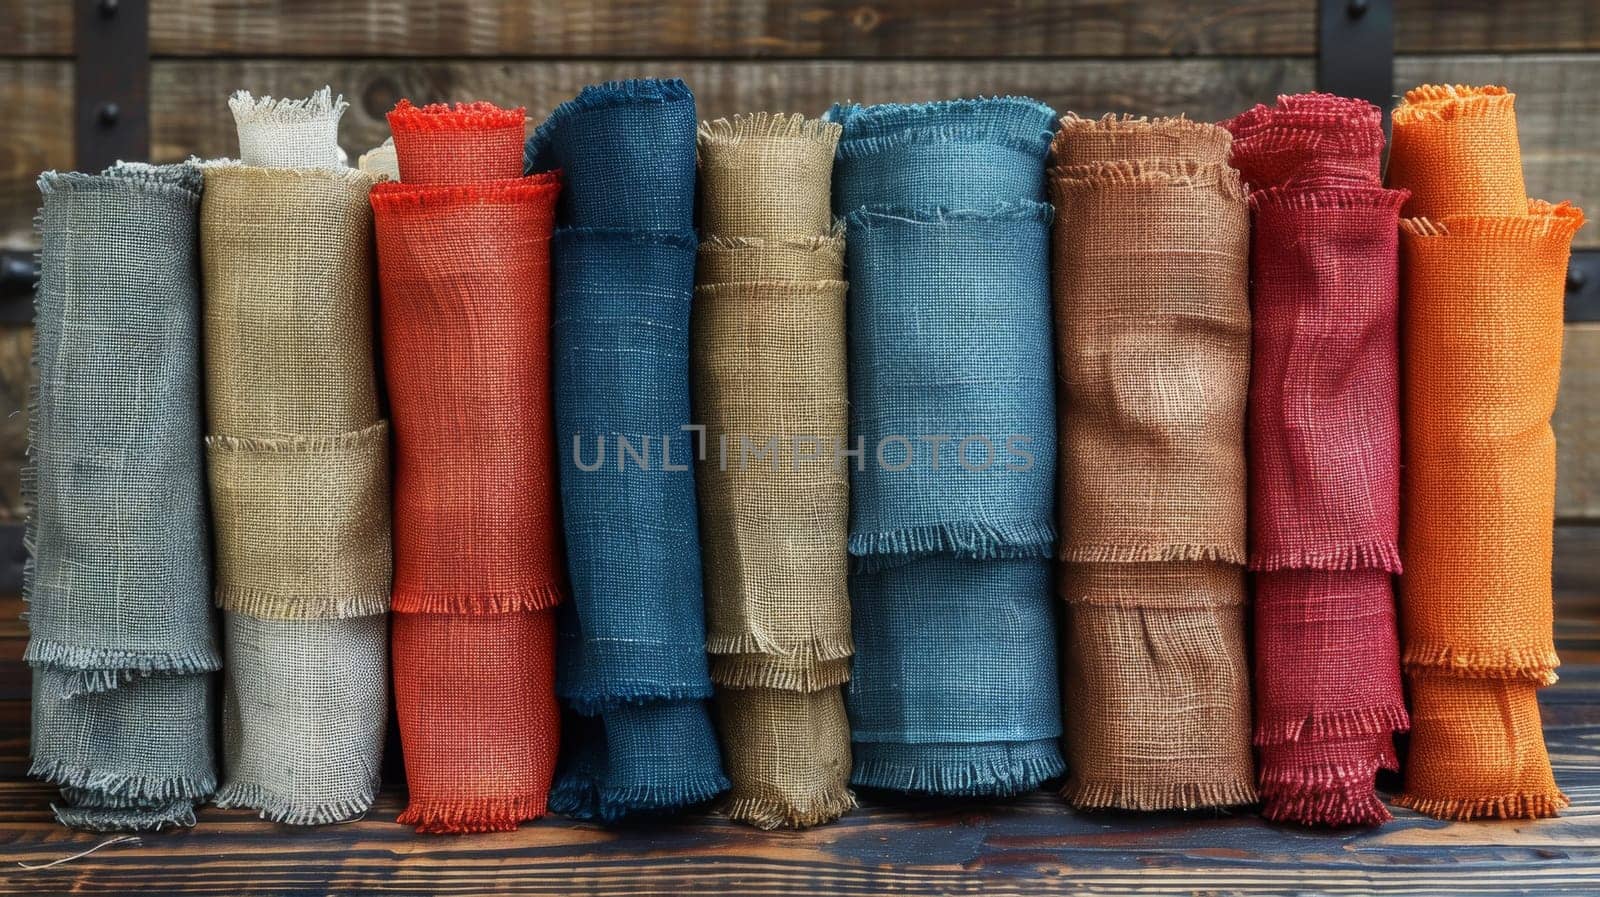 A stack of different colored cloths on a wooden table